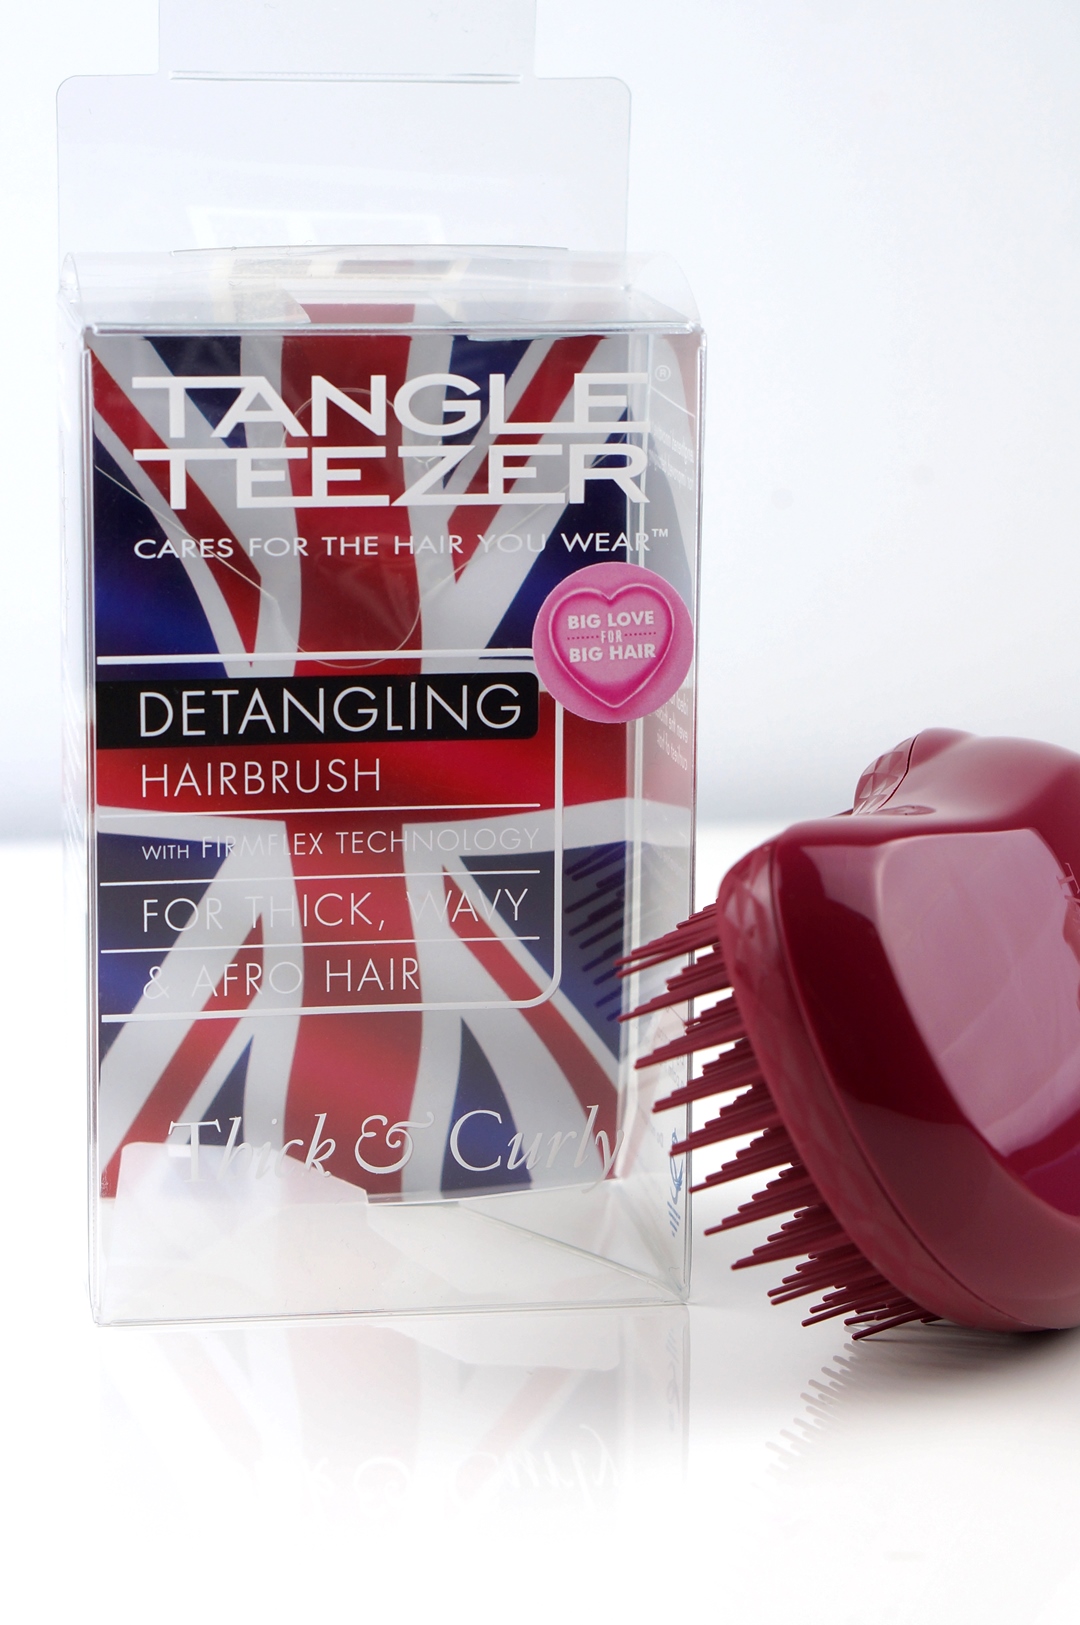 Tange Teezer Thick, Curly hair